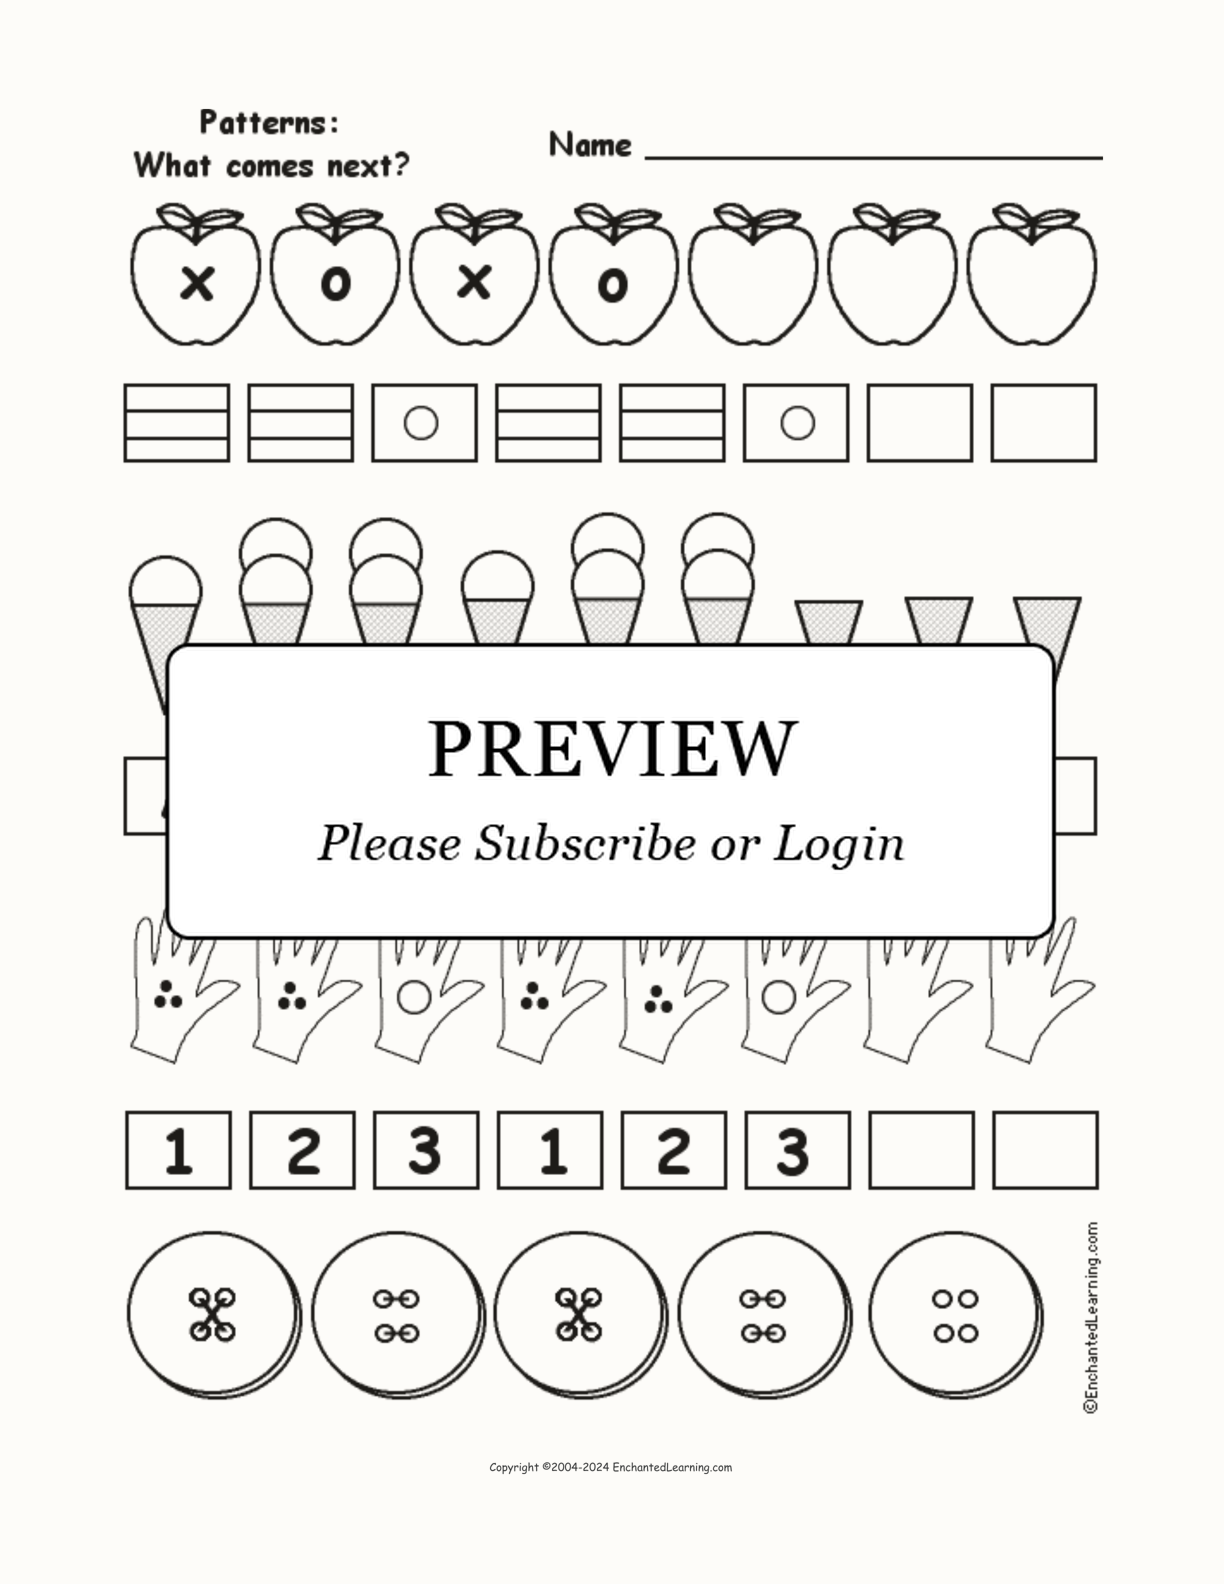 What Comes Next In The Patterns - Worksheet interactive printout page 1